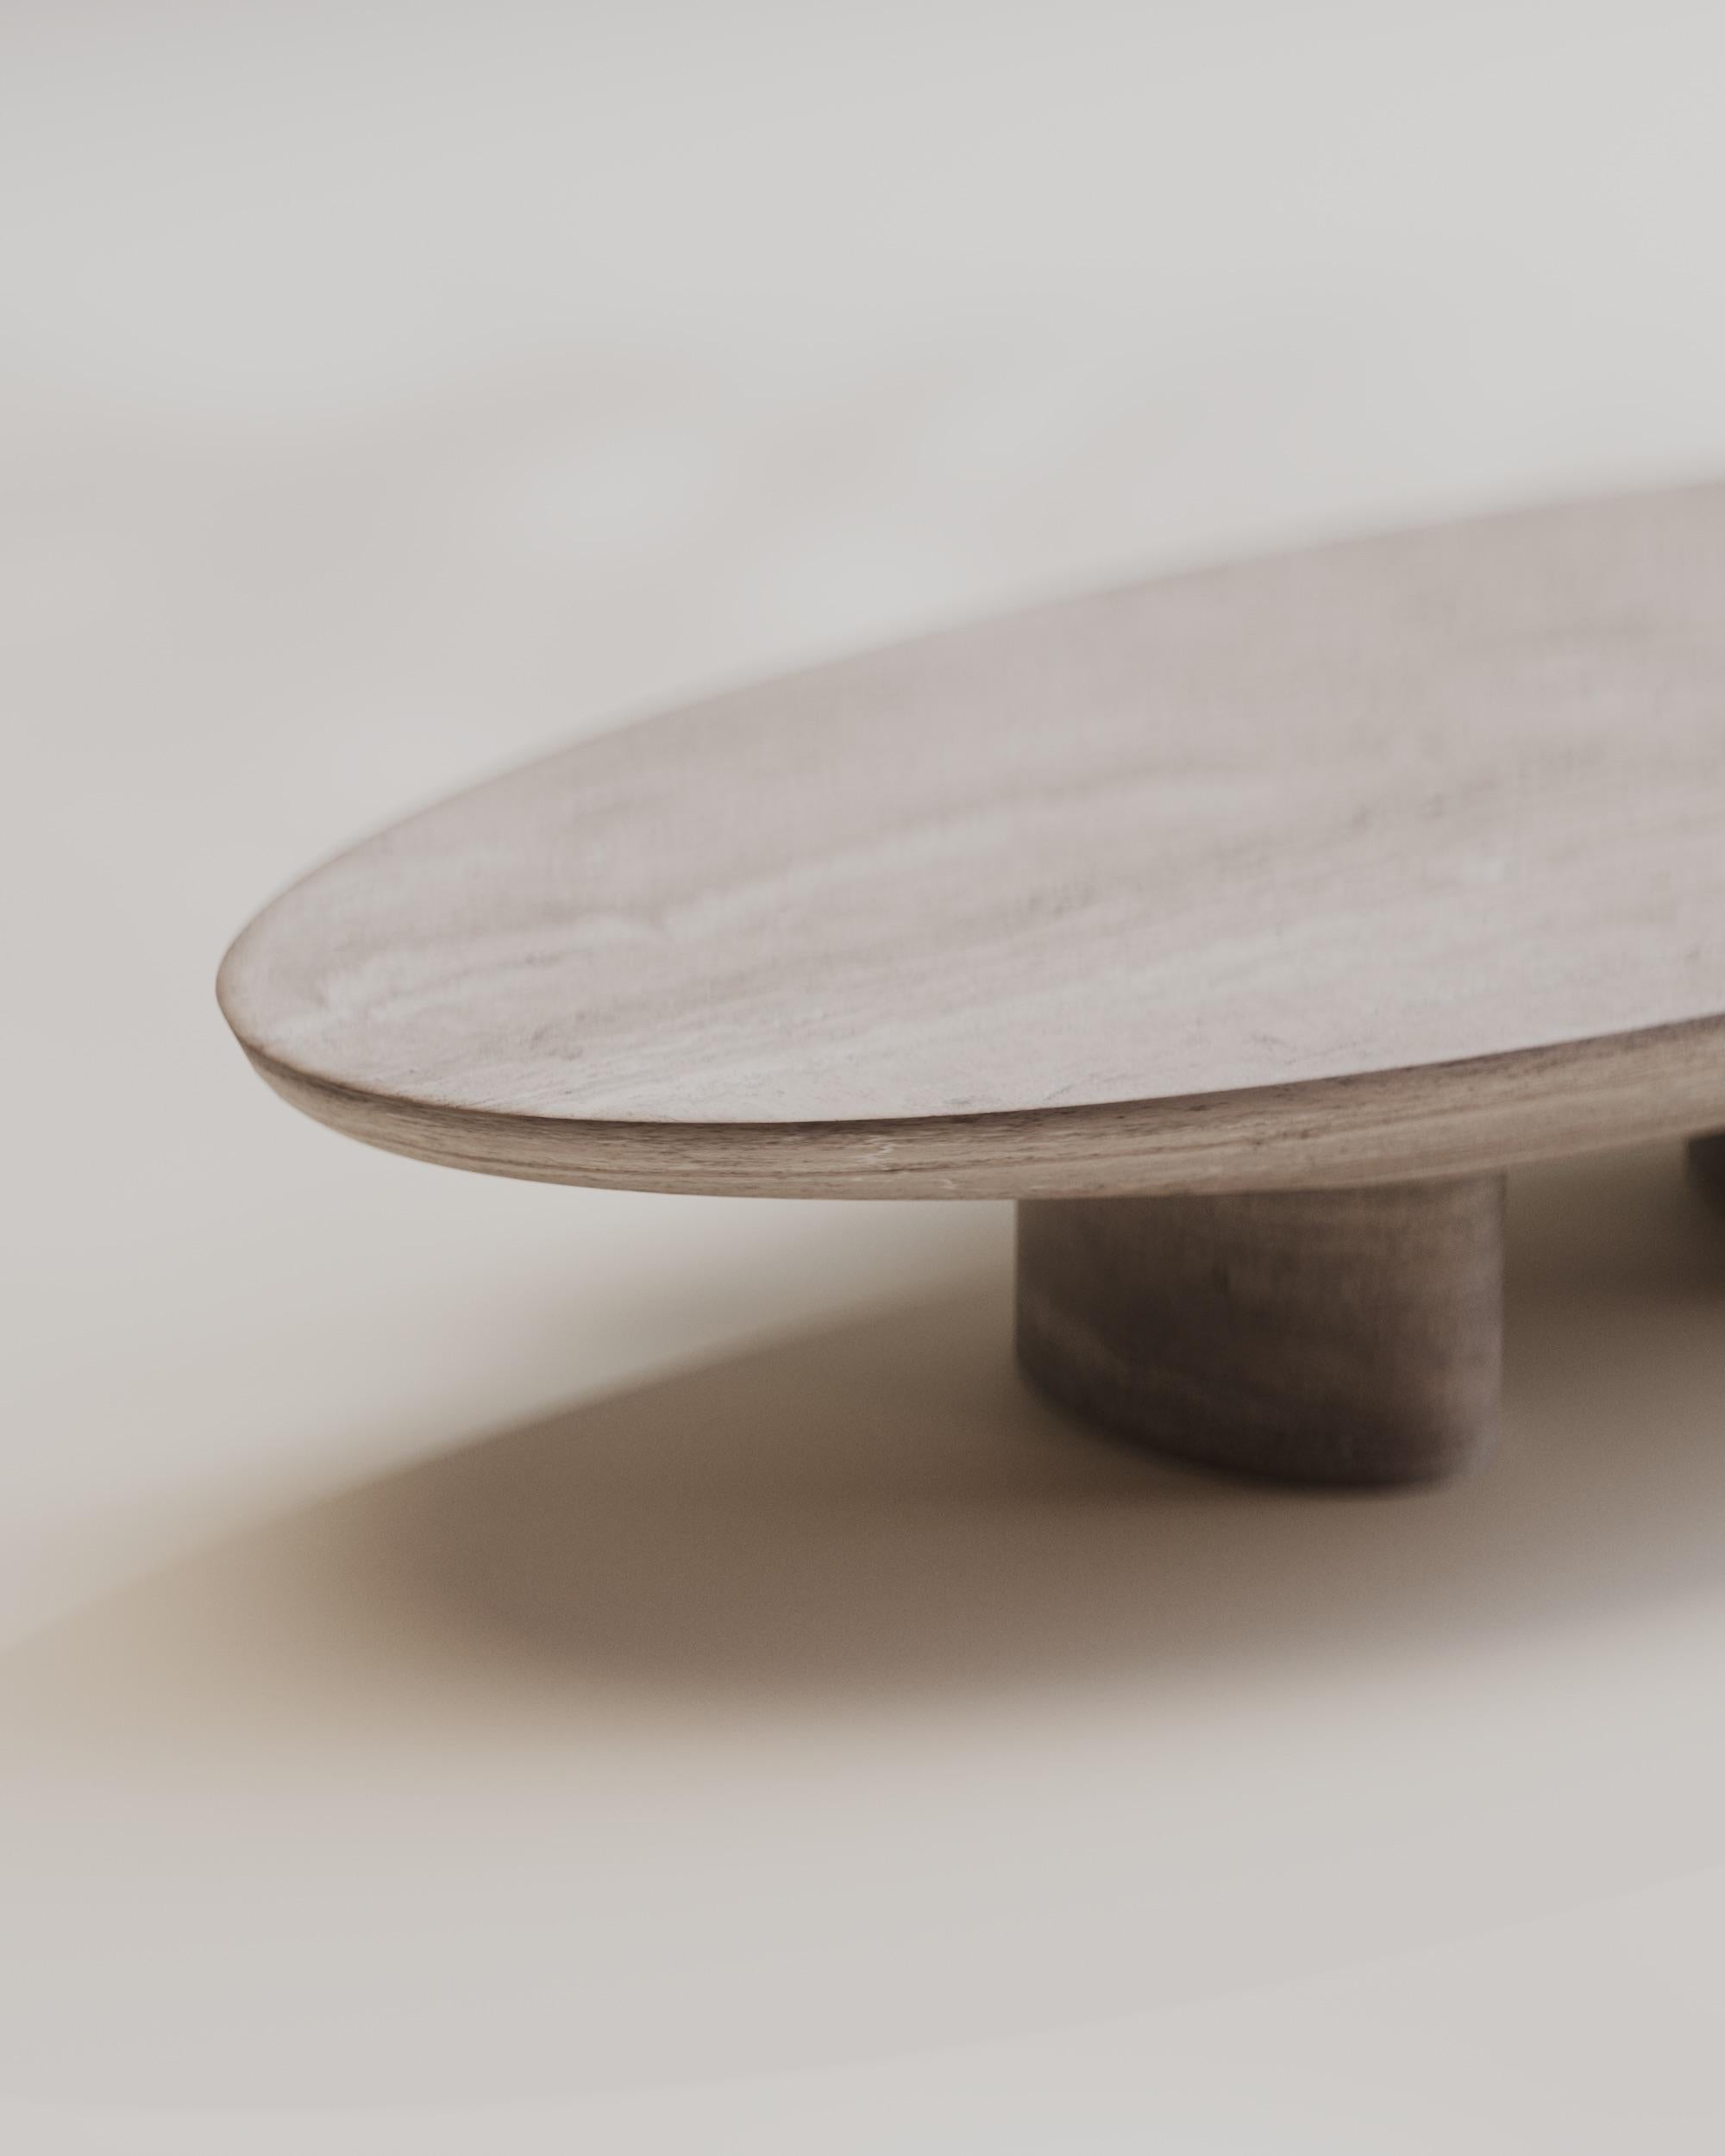 Italian Solid Silver Travertine Oval Coffee Table 160 by Studio Narra For Sale